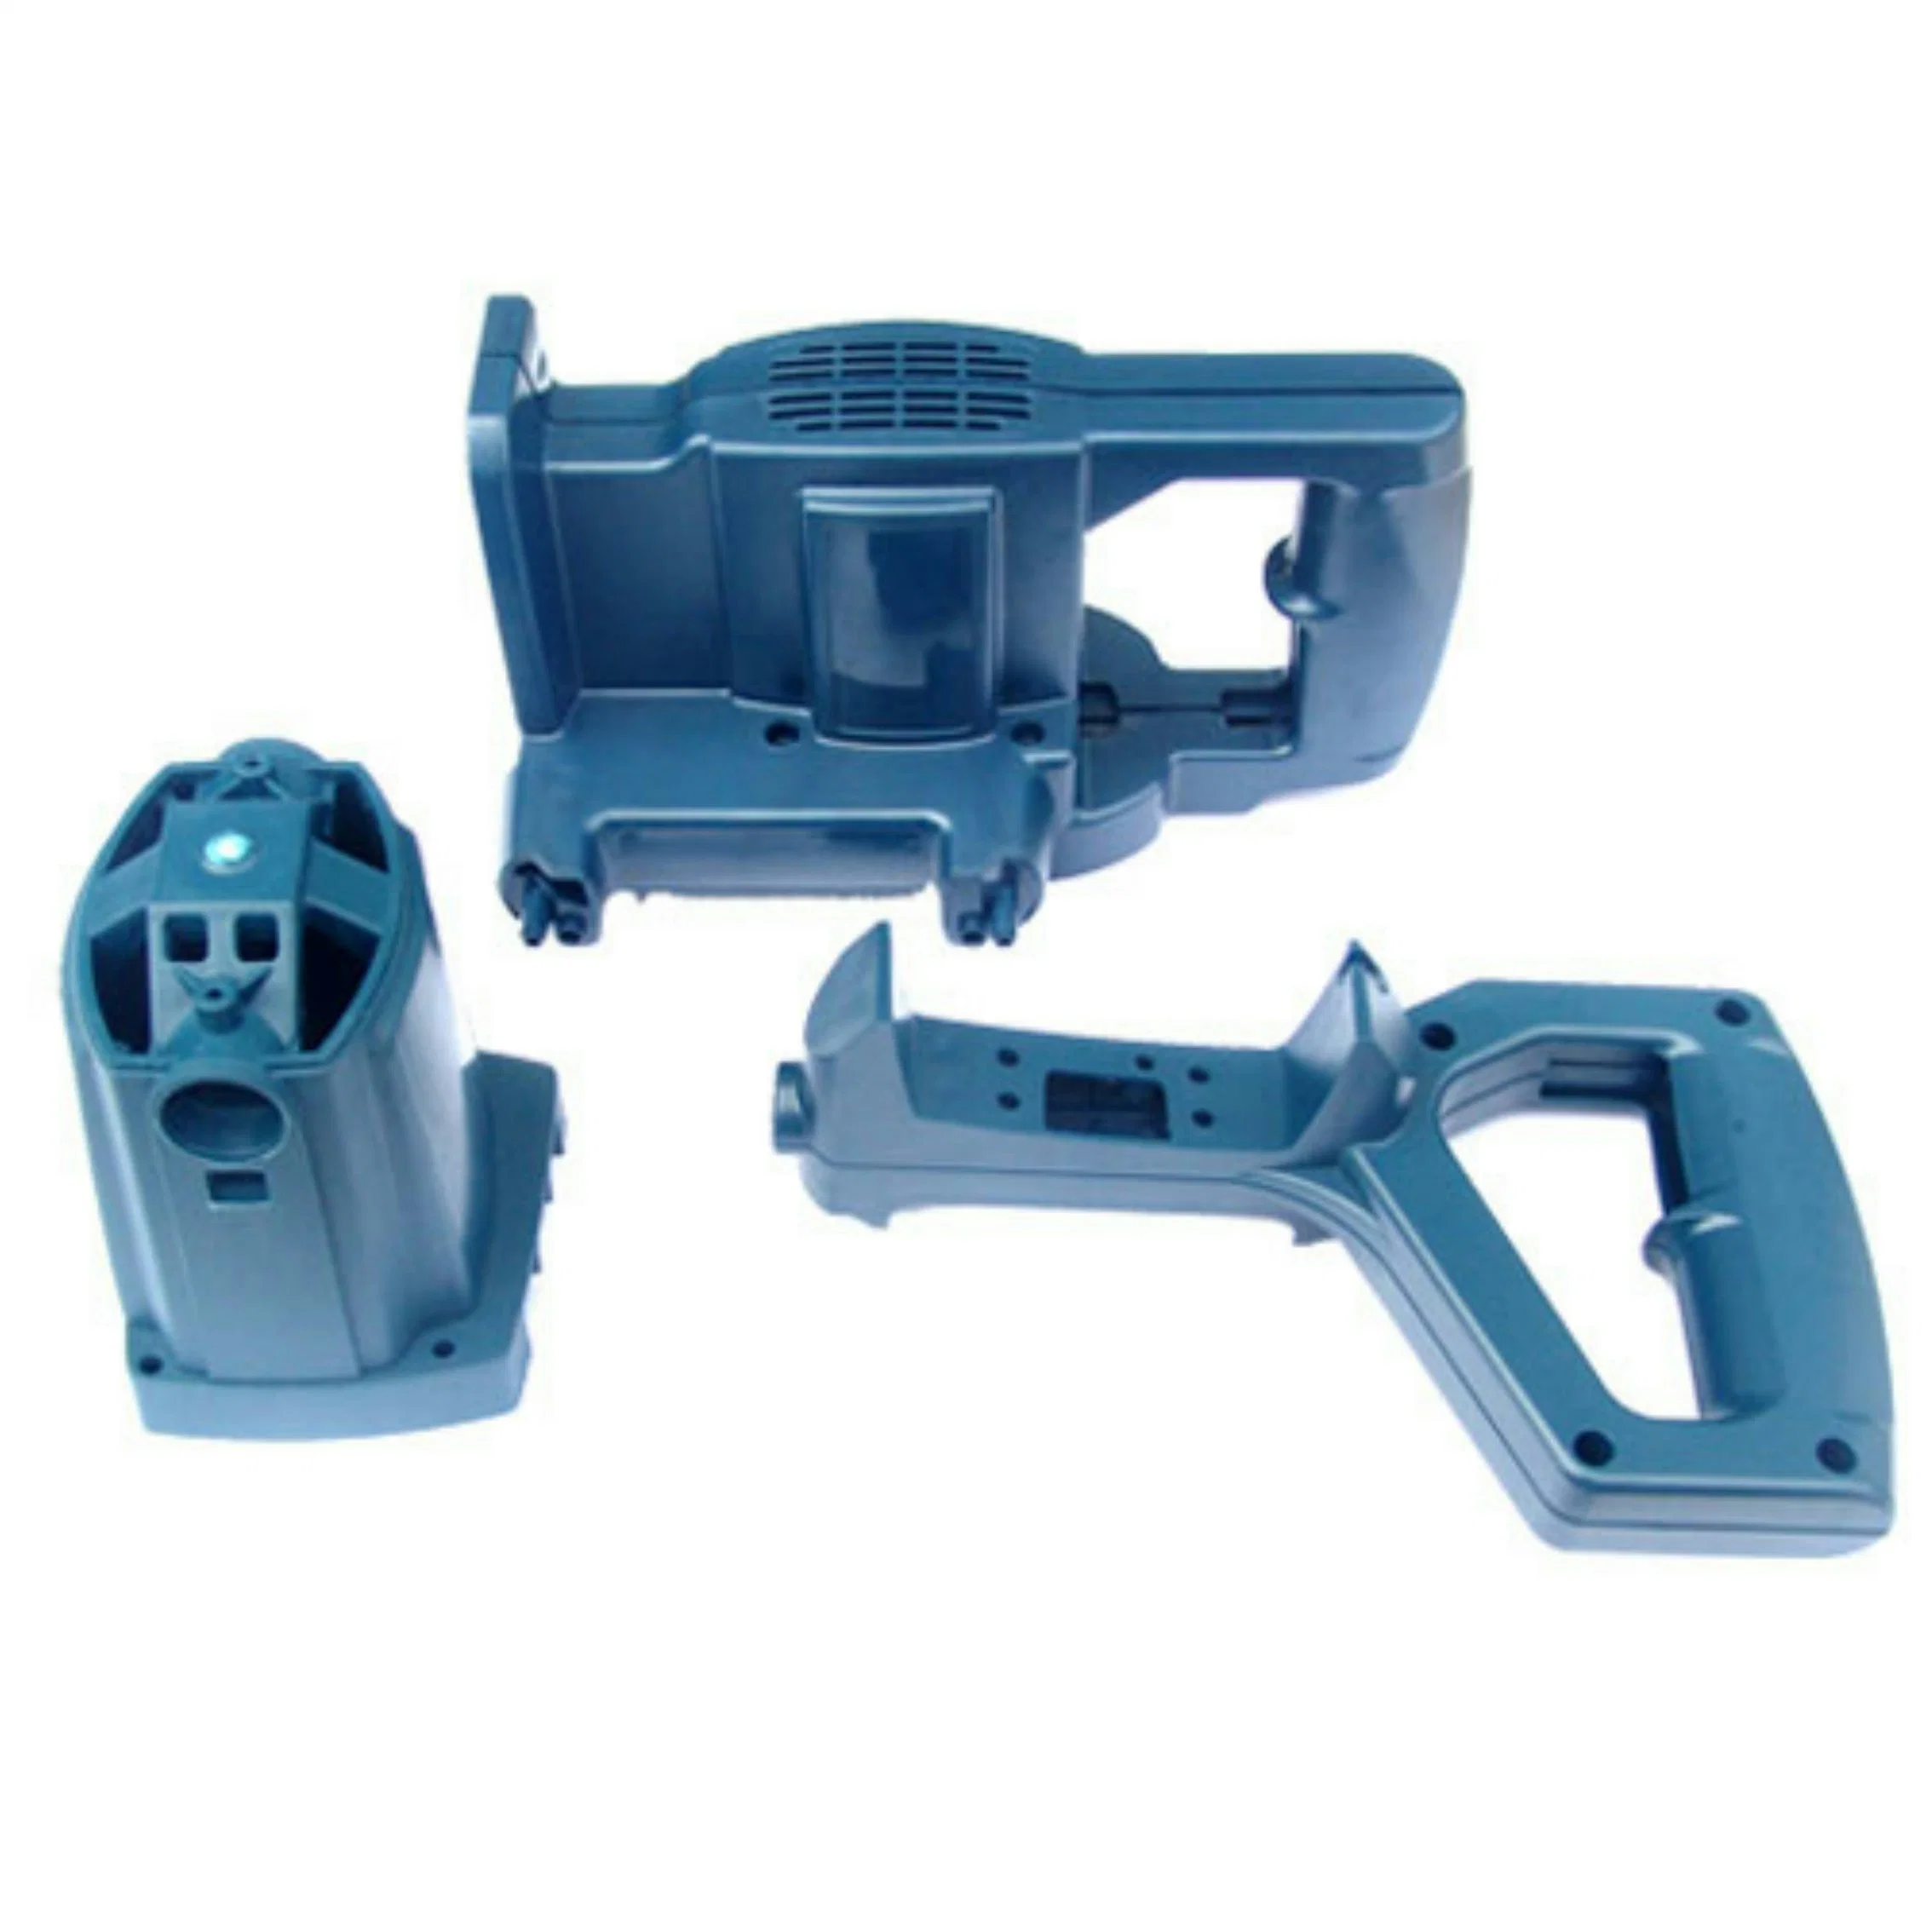 Power Tool Plastic Accessories Are Made From Custom Plastic Molding